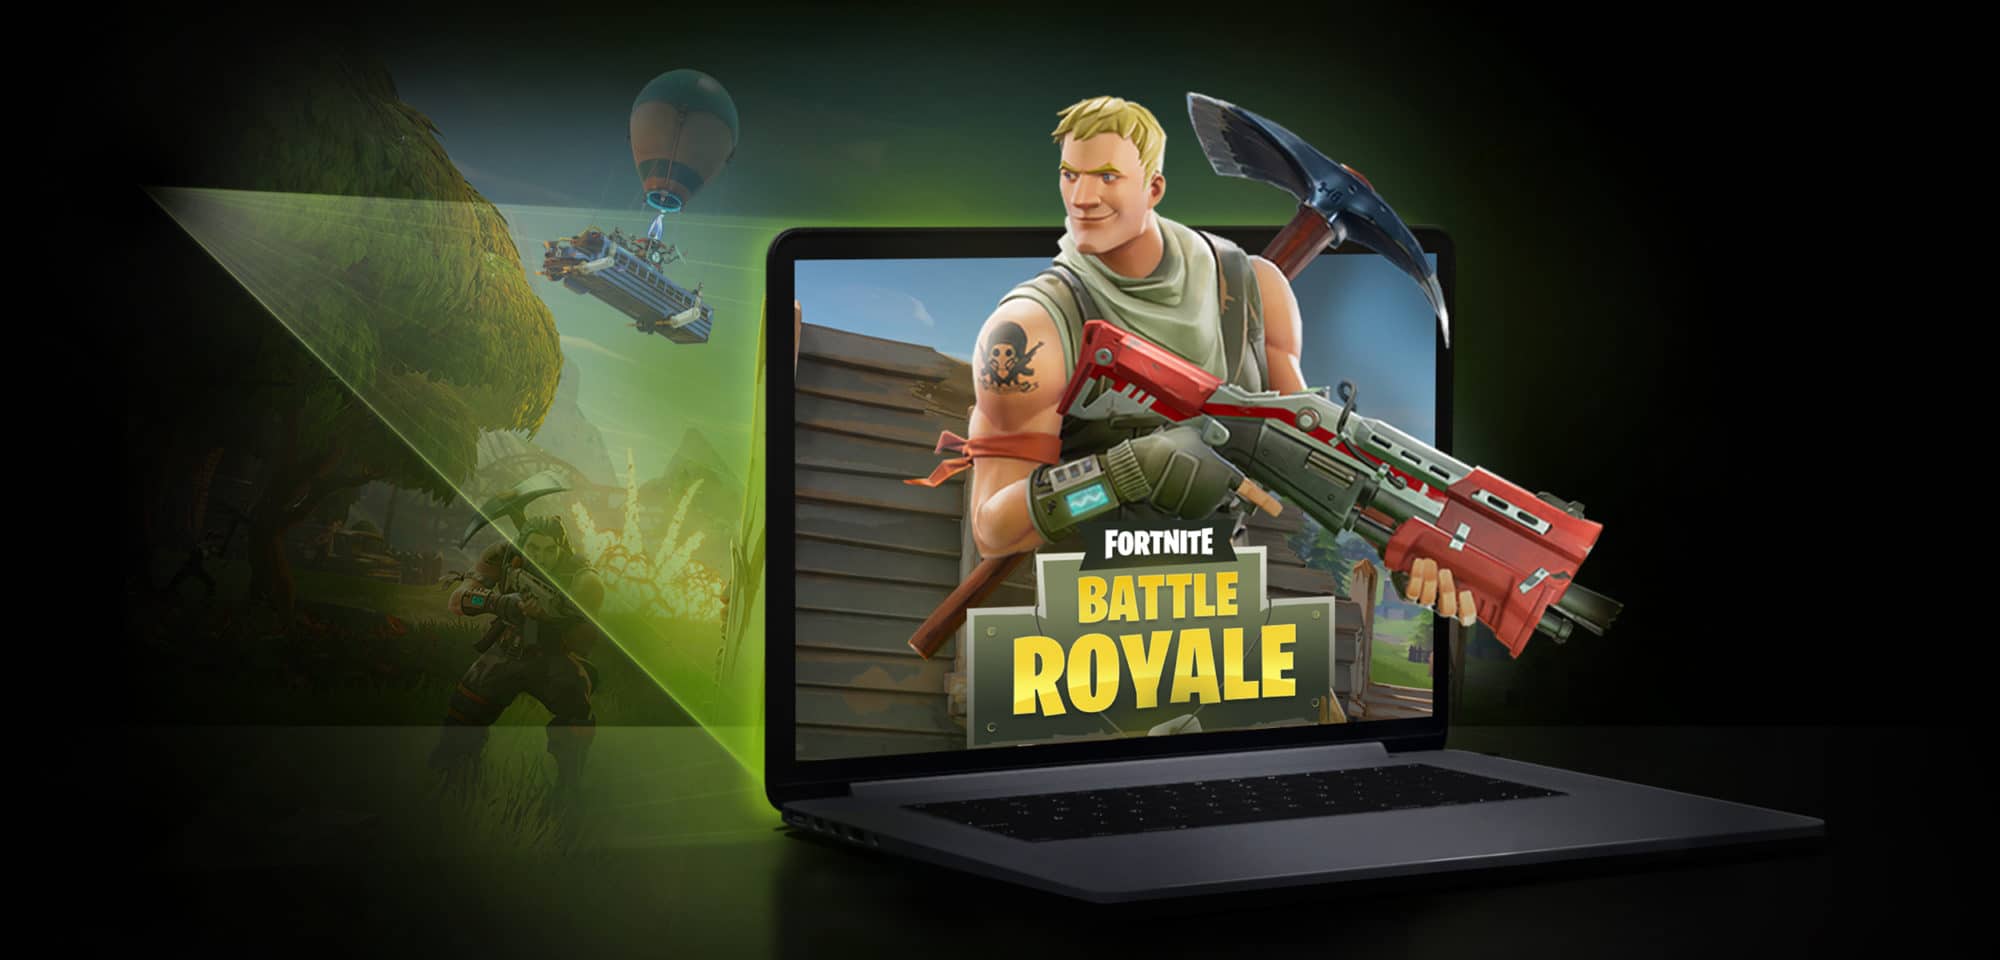 Geforce Now Fortnite Better Quality With Geforce Now A Billion Cheap Pcs Can Now Taste Gaming Greatness Too Nvidia Blog